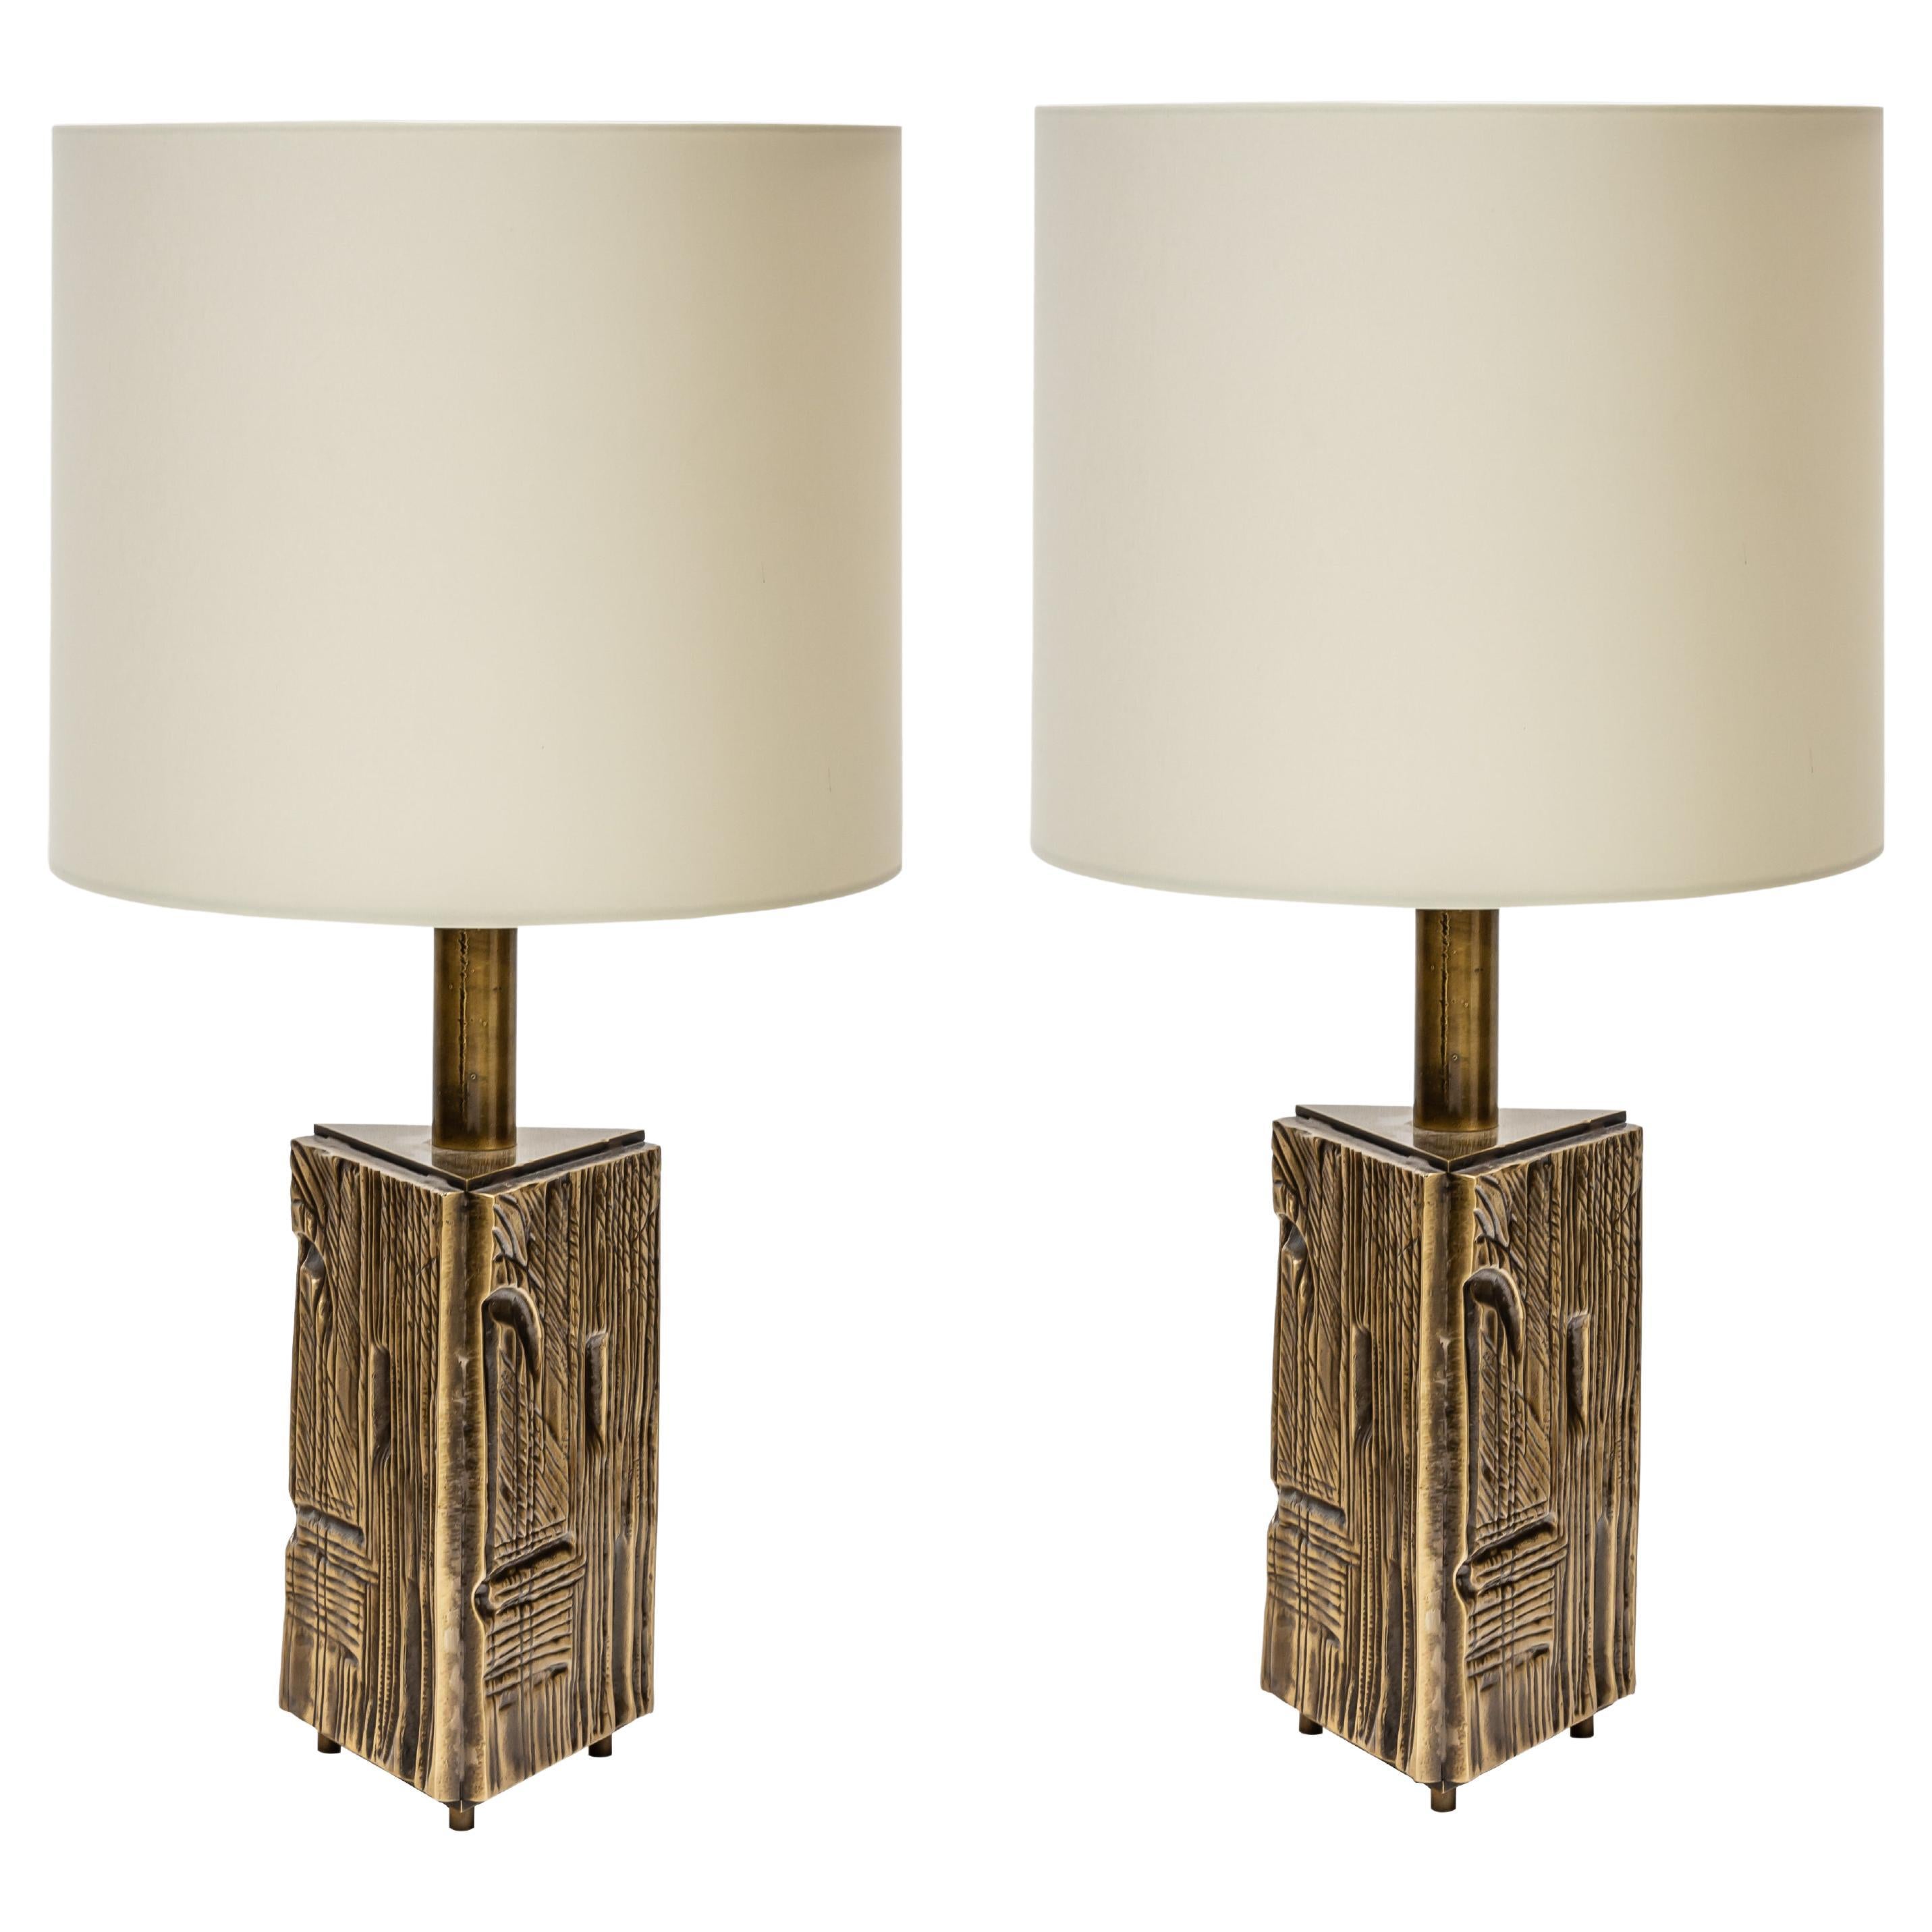 Pair of Table Lamps 60s Italian Design by Luciano Frigerio Cream Silk Shades